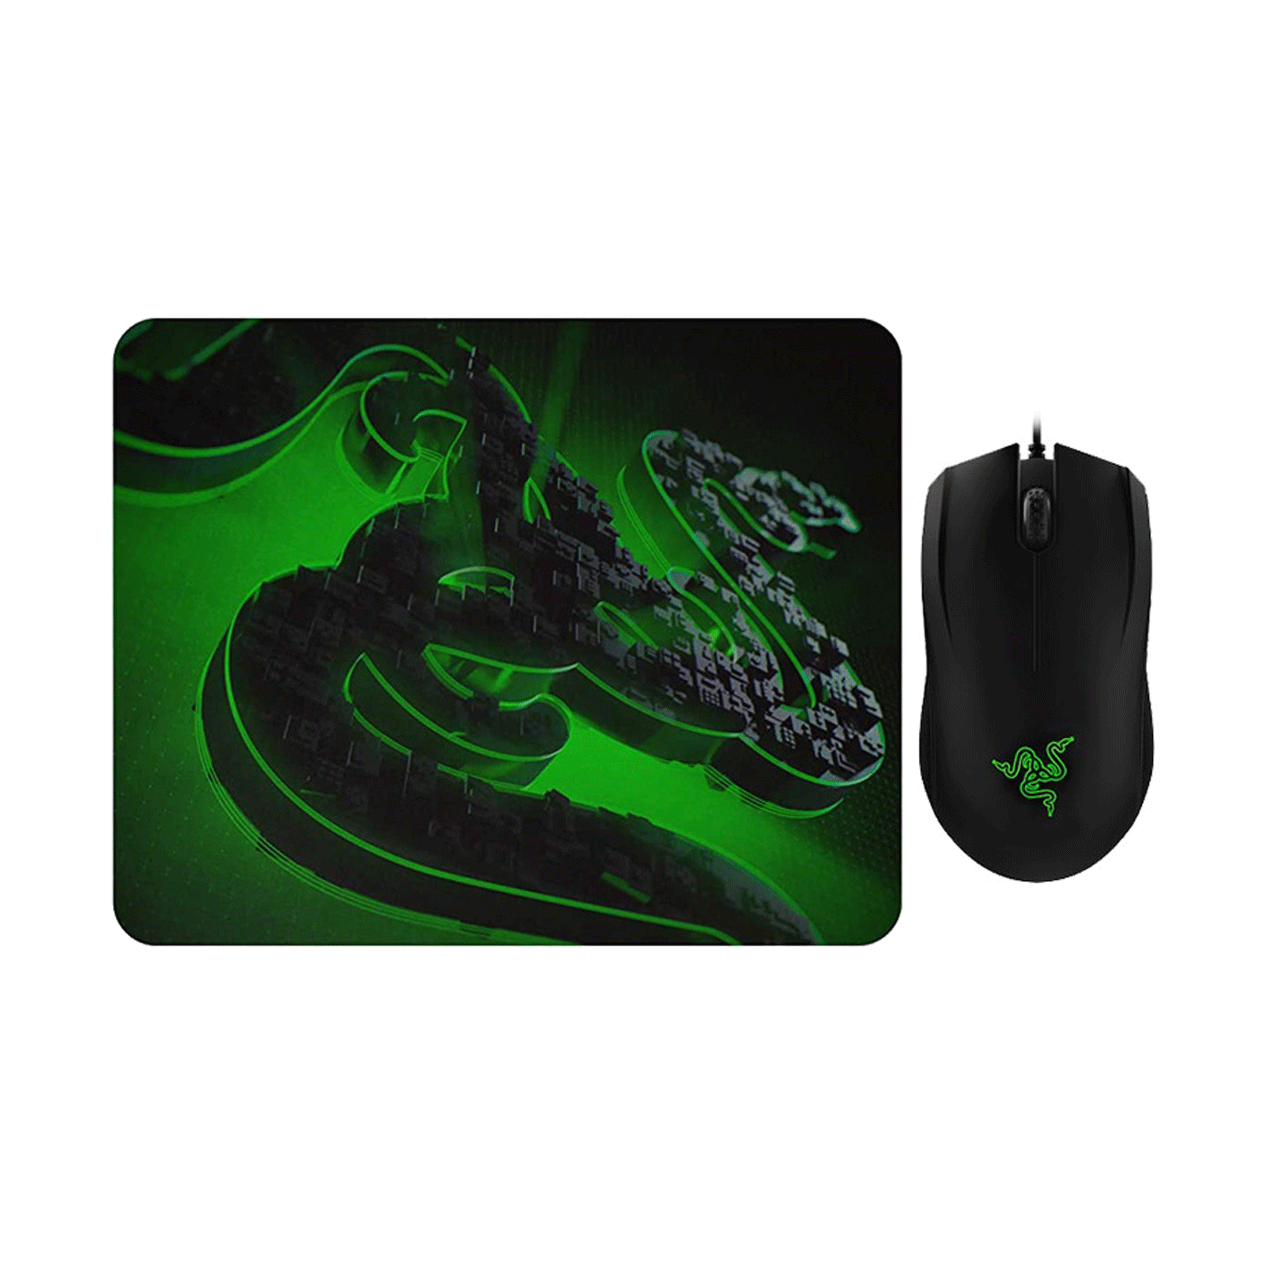 Abyssus-2014-Mouse-and--=-Goliathus-Mousepad-Bundle